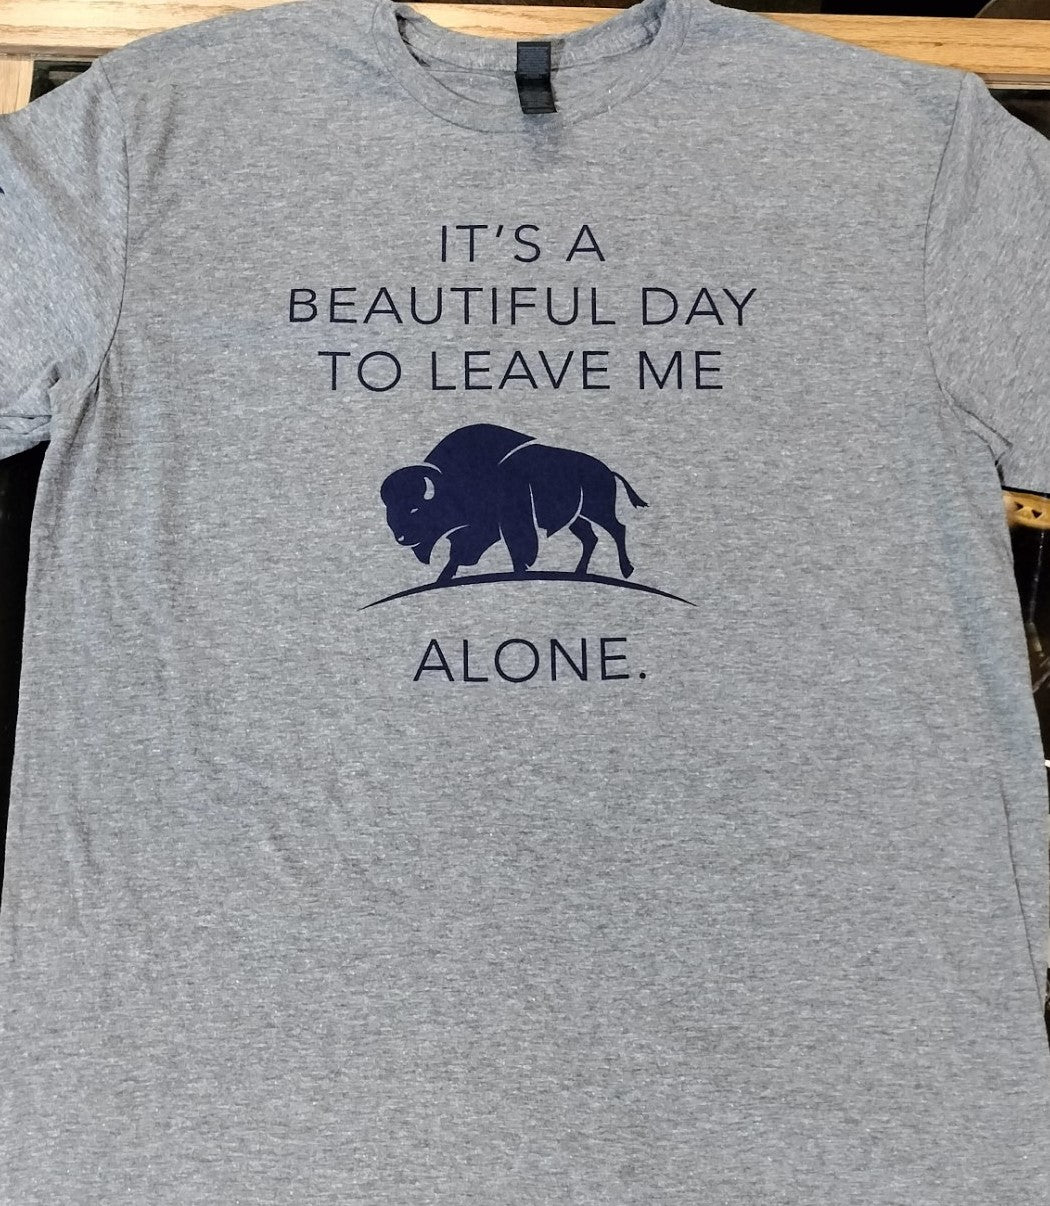 "It is a Beautiful Day ...." t-shirt